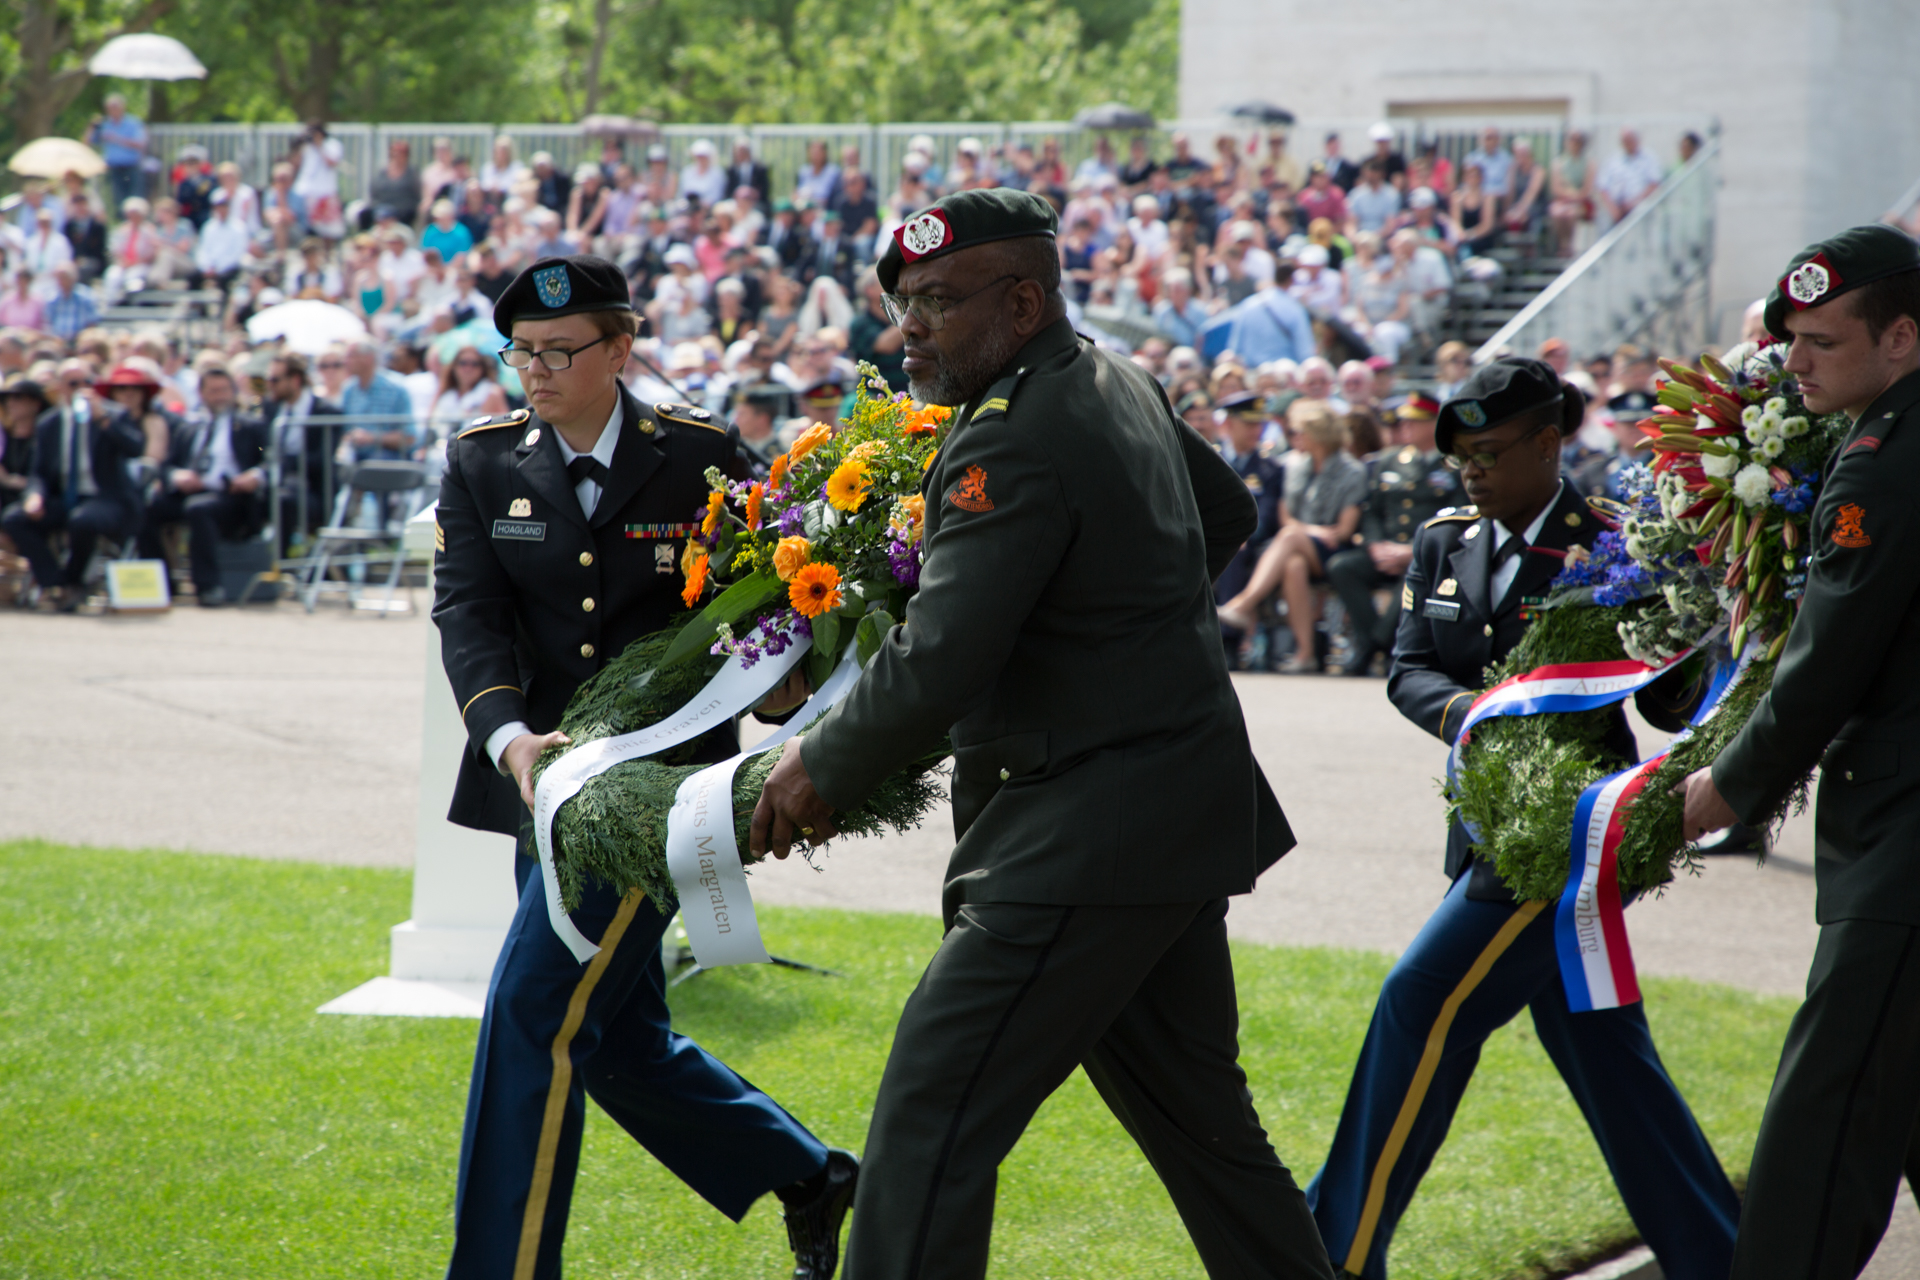 Men and women in uniform carry floral wreaths. 